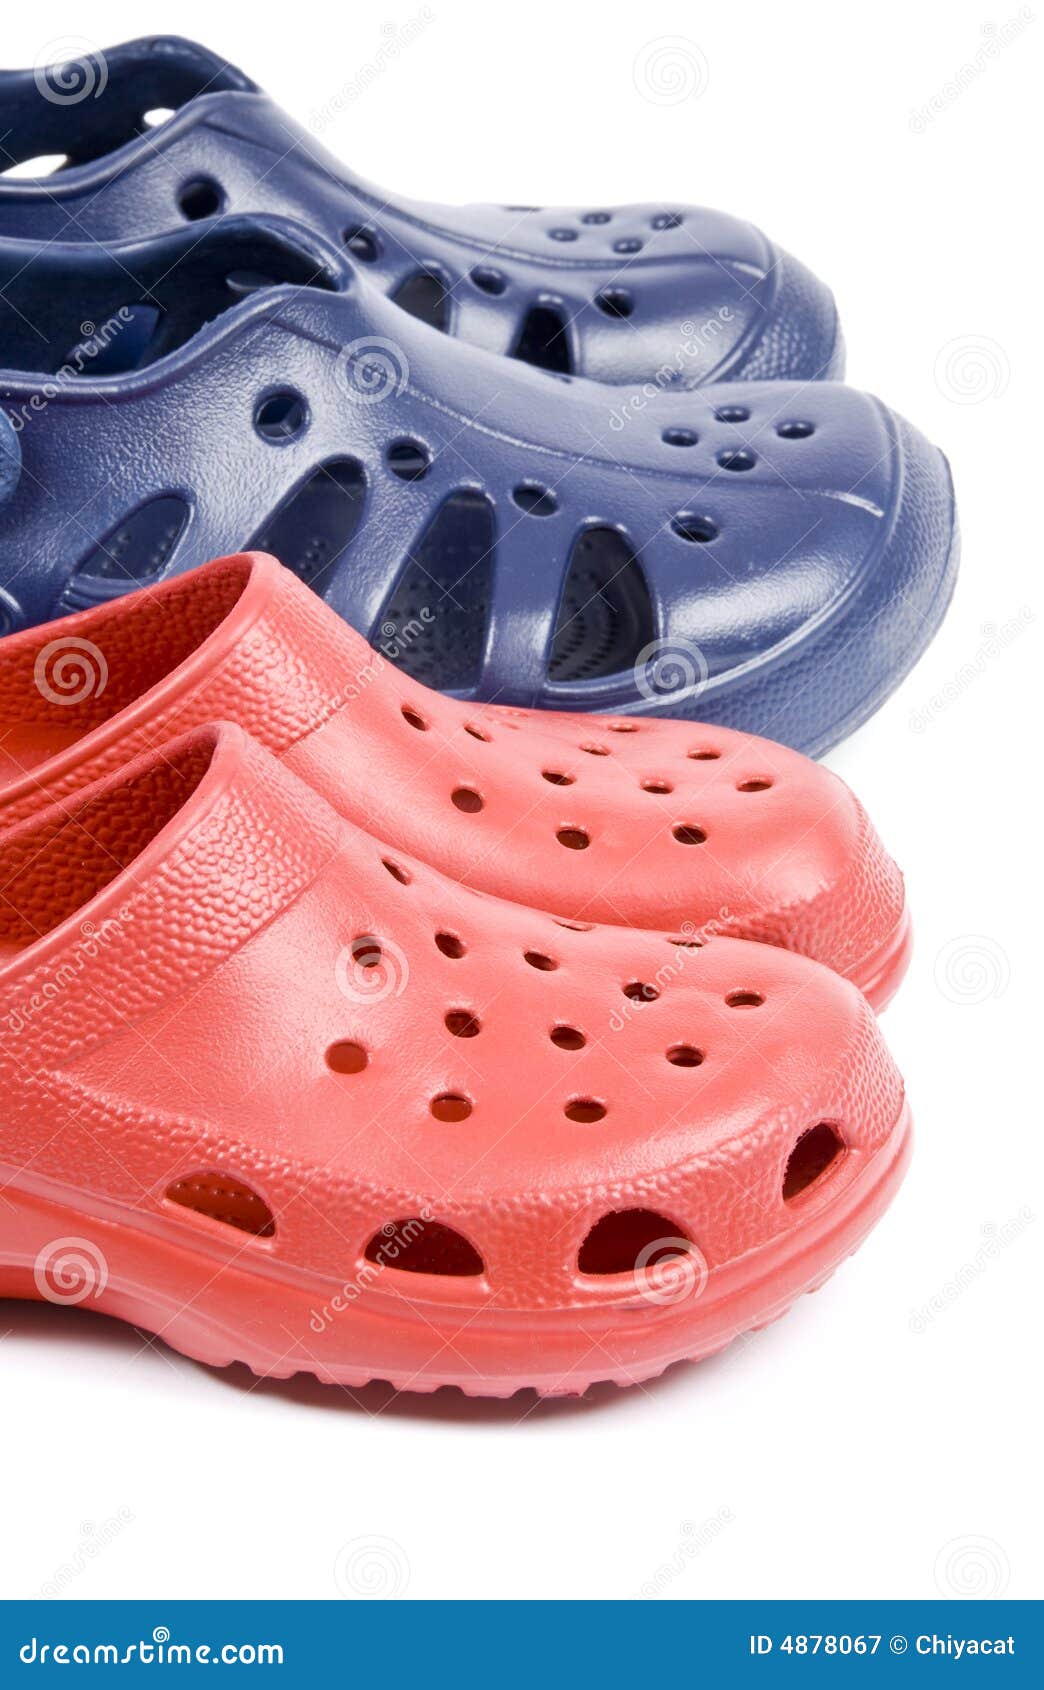 Colorful Plastic Clogs stock image. Image of gardening - 4878067